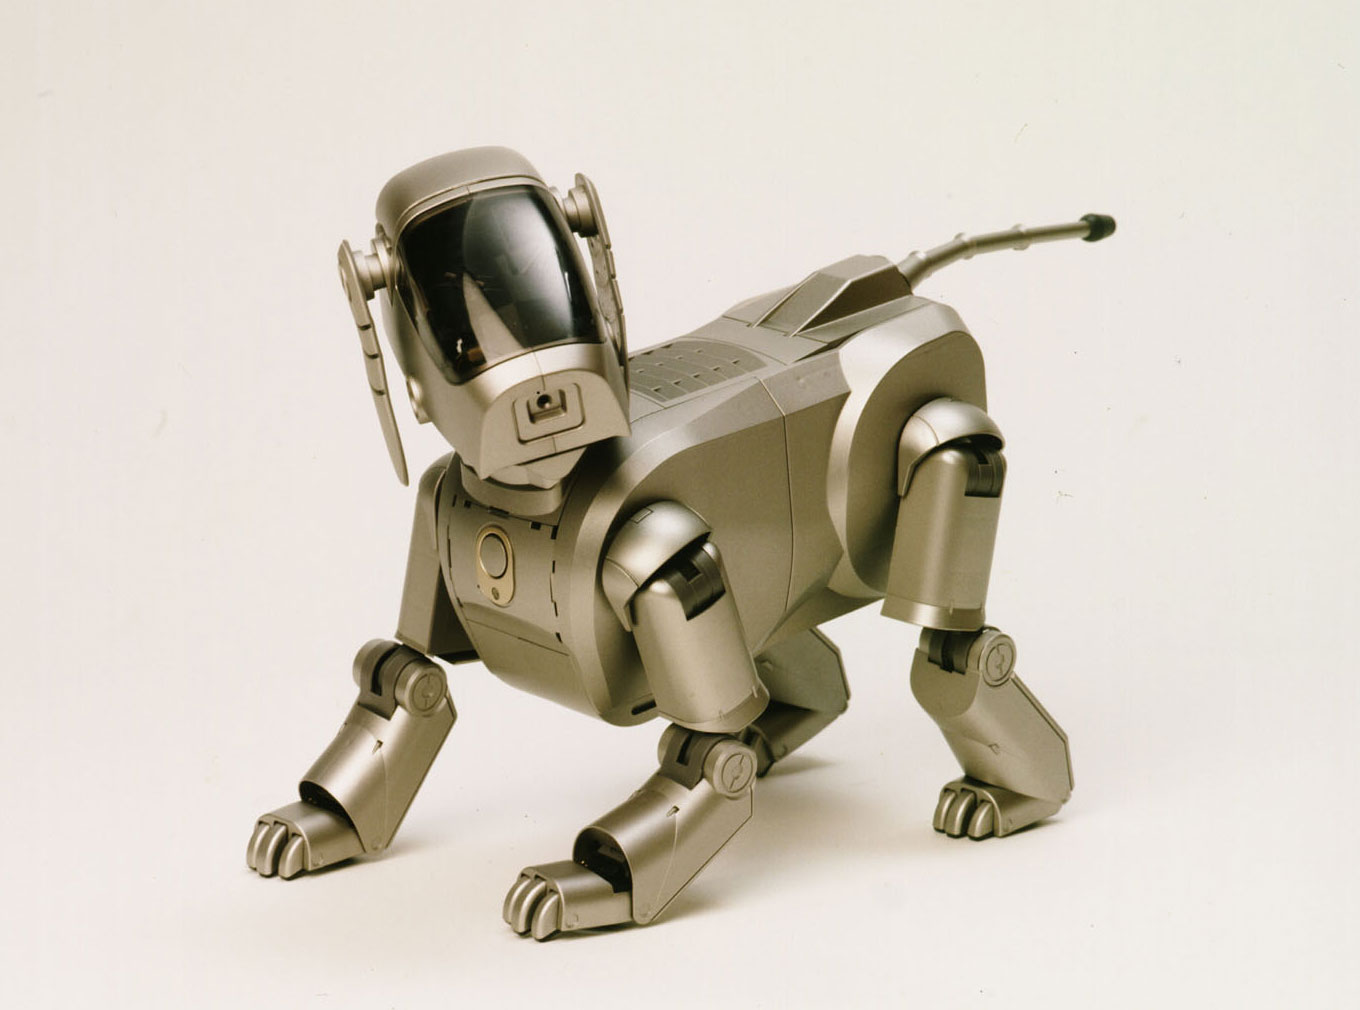 Sony Aibo is reportedly returning with Amazon Echo-like features